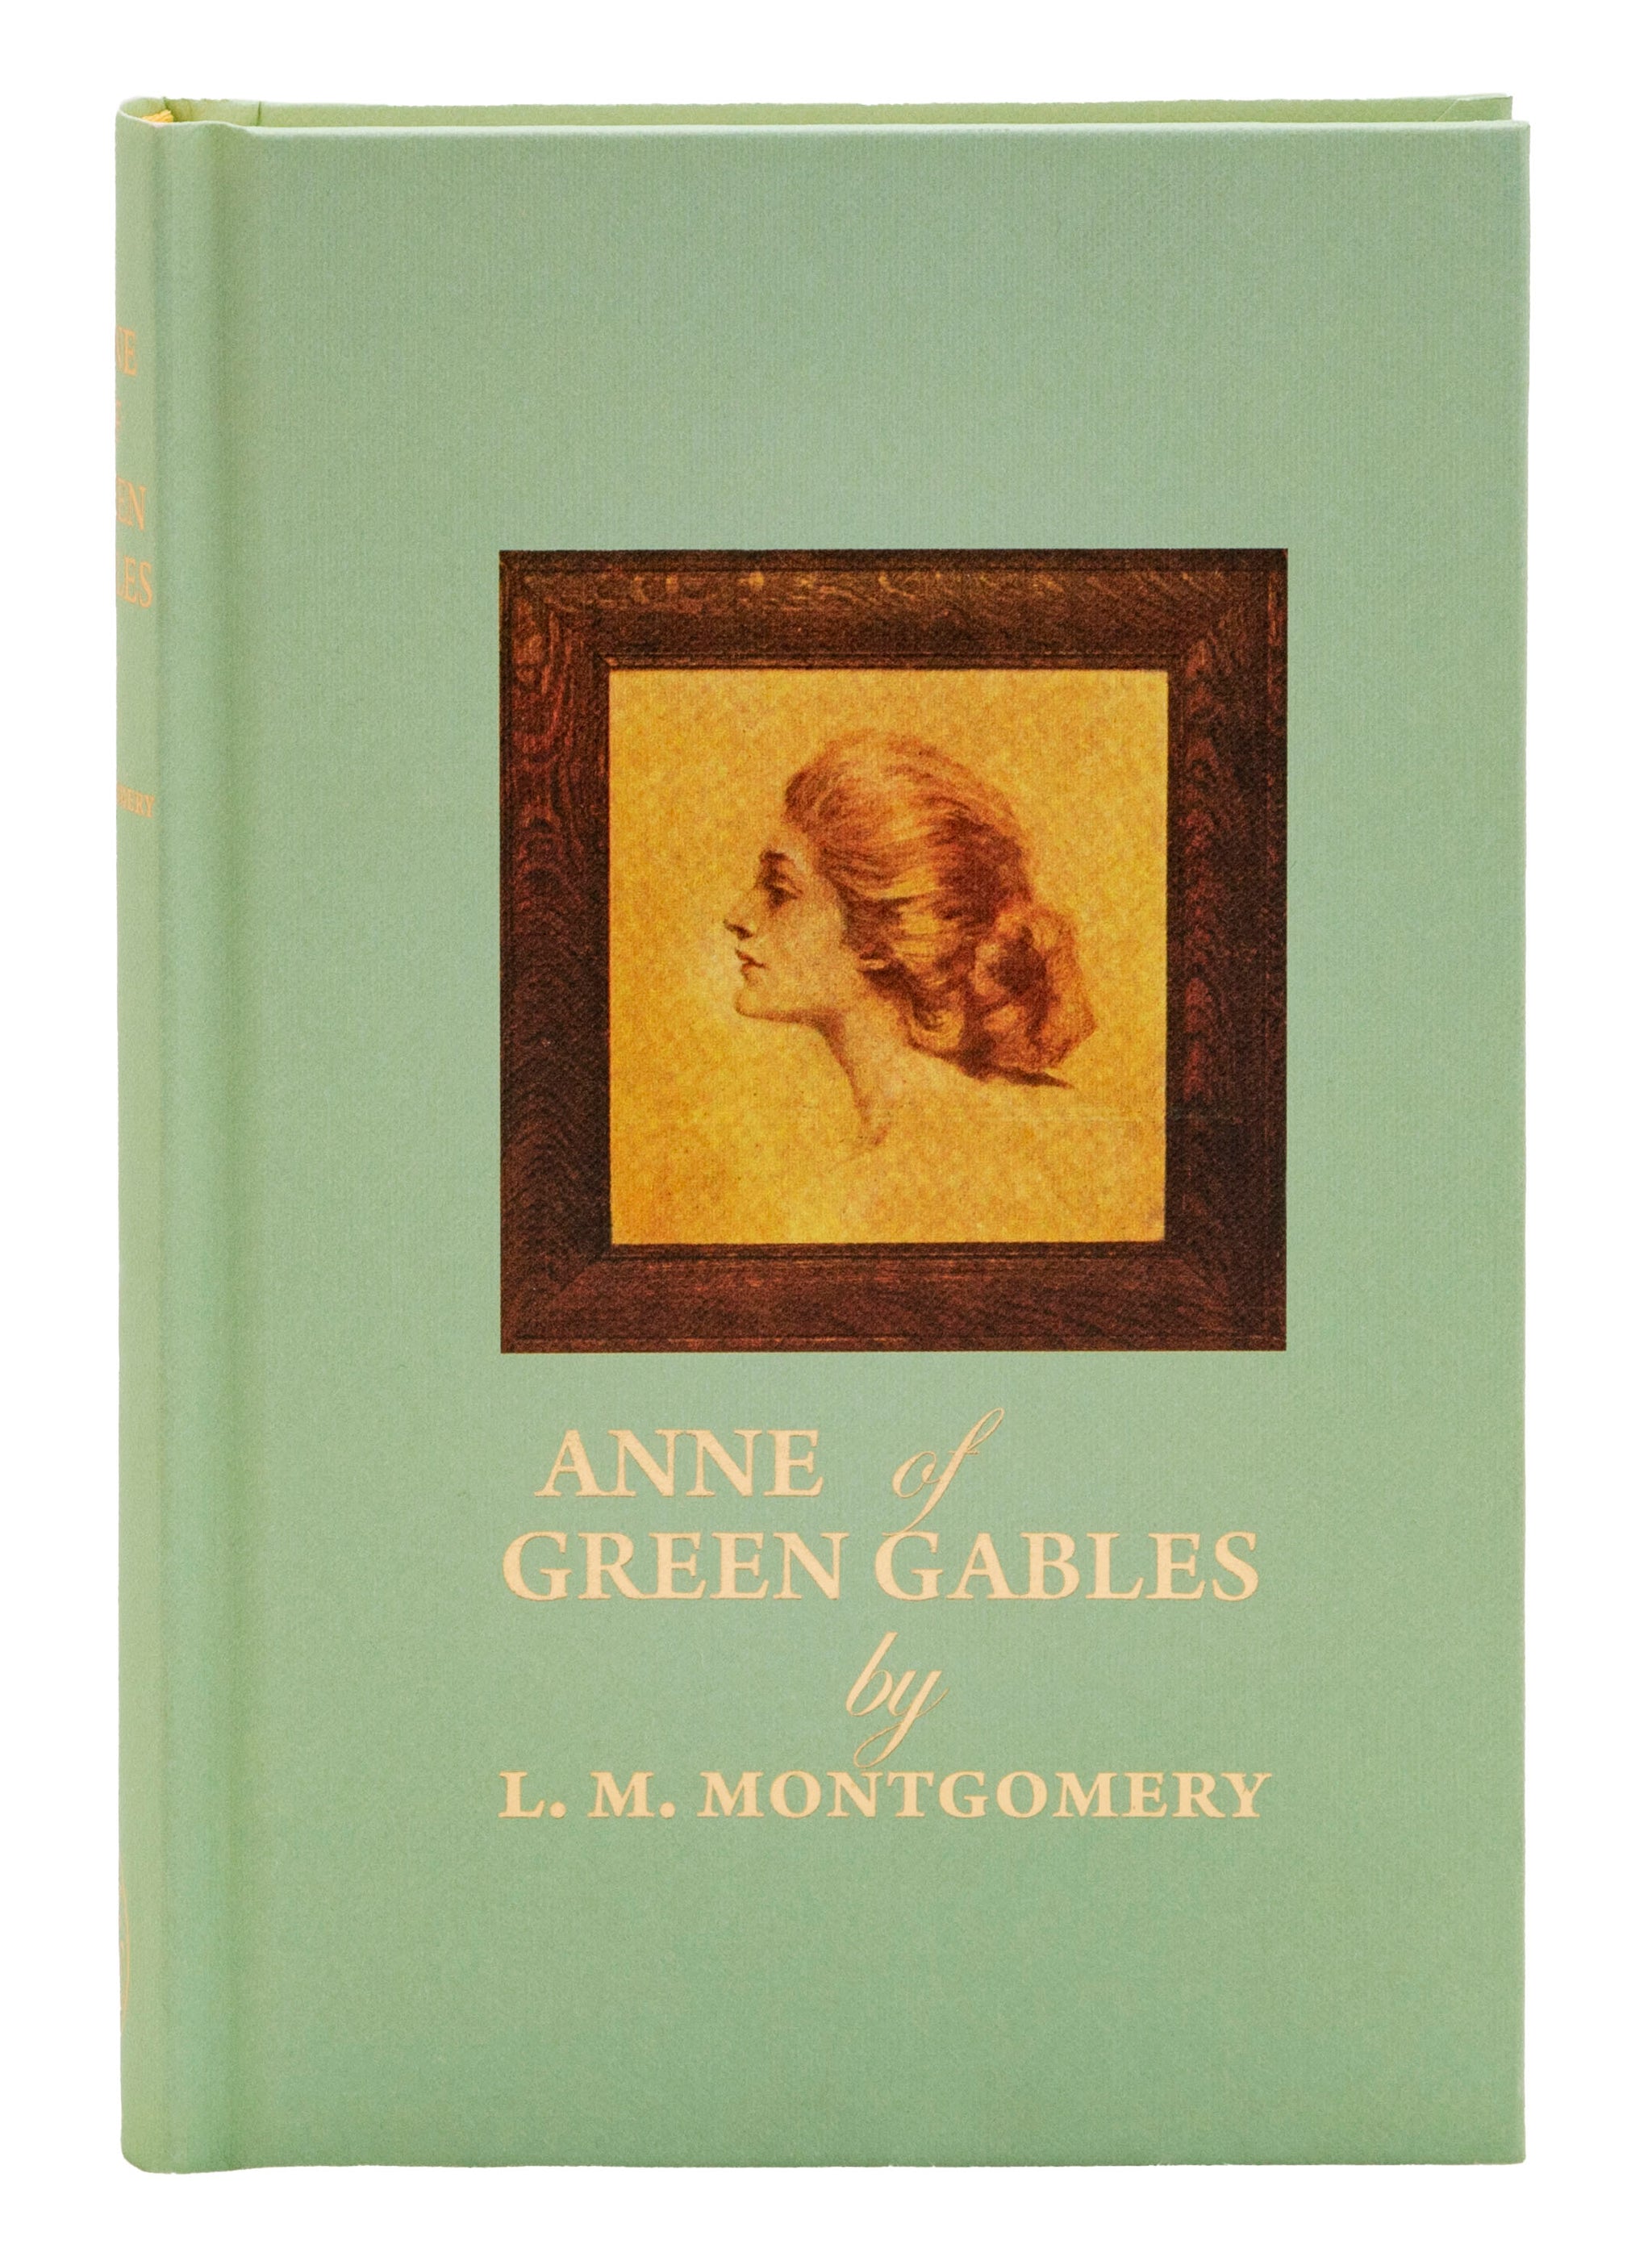 Green　Gables　Edition　Special　Limited　(Hardcover　Anne　Theannestore　of　Book)